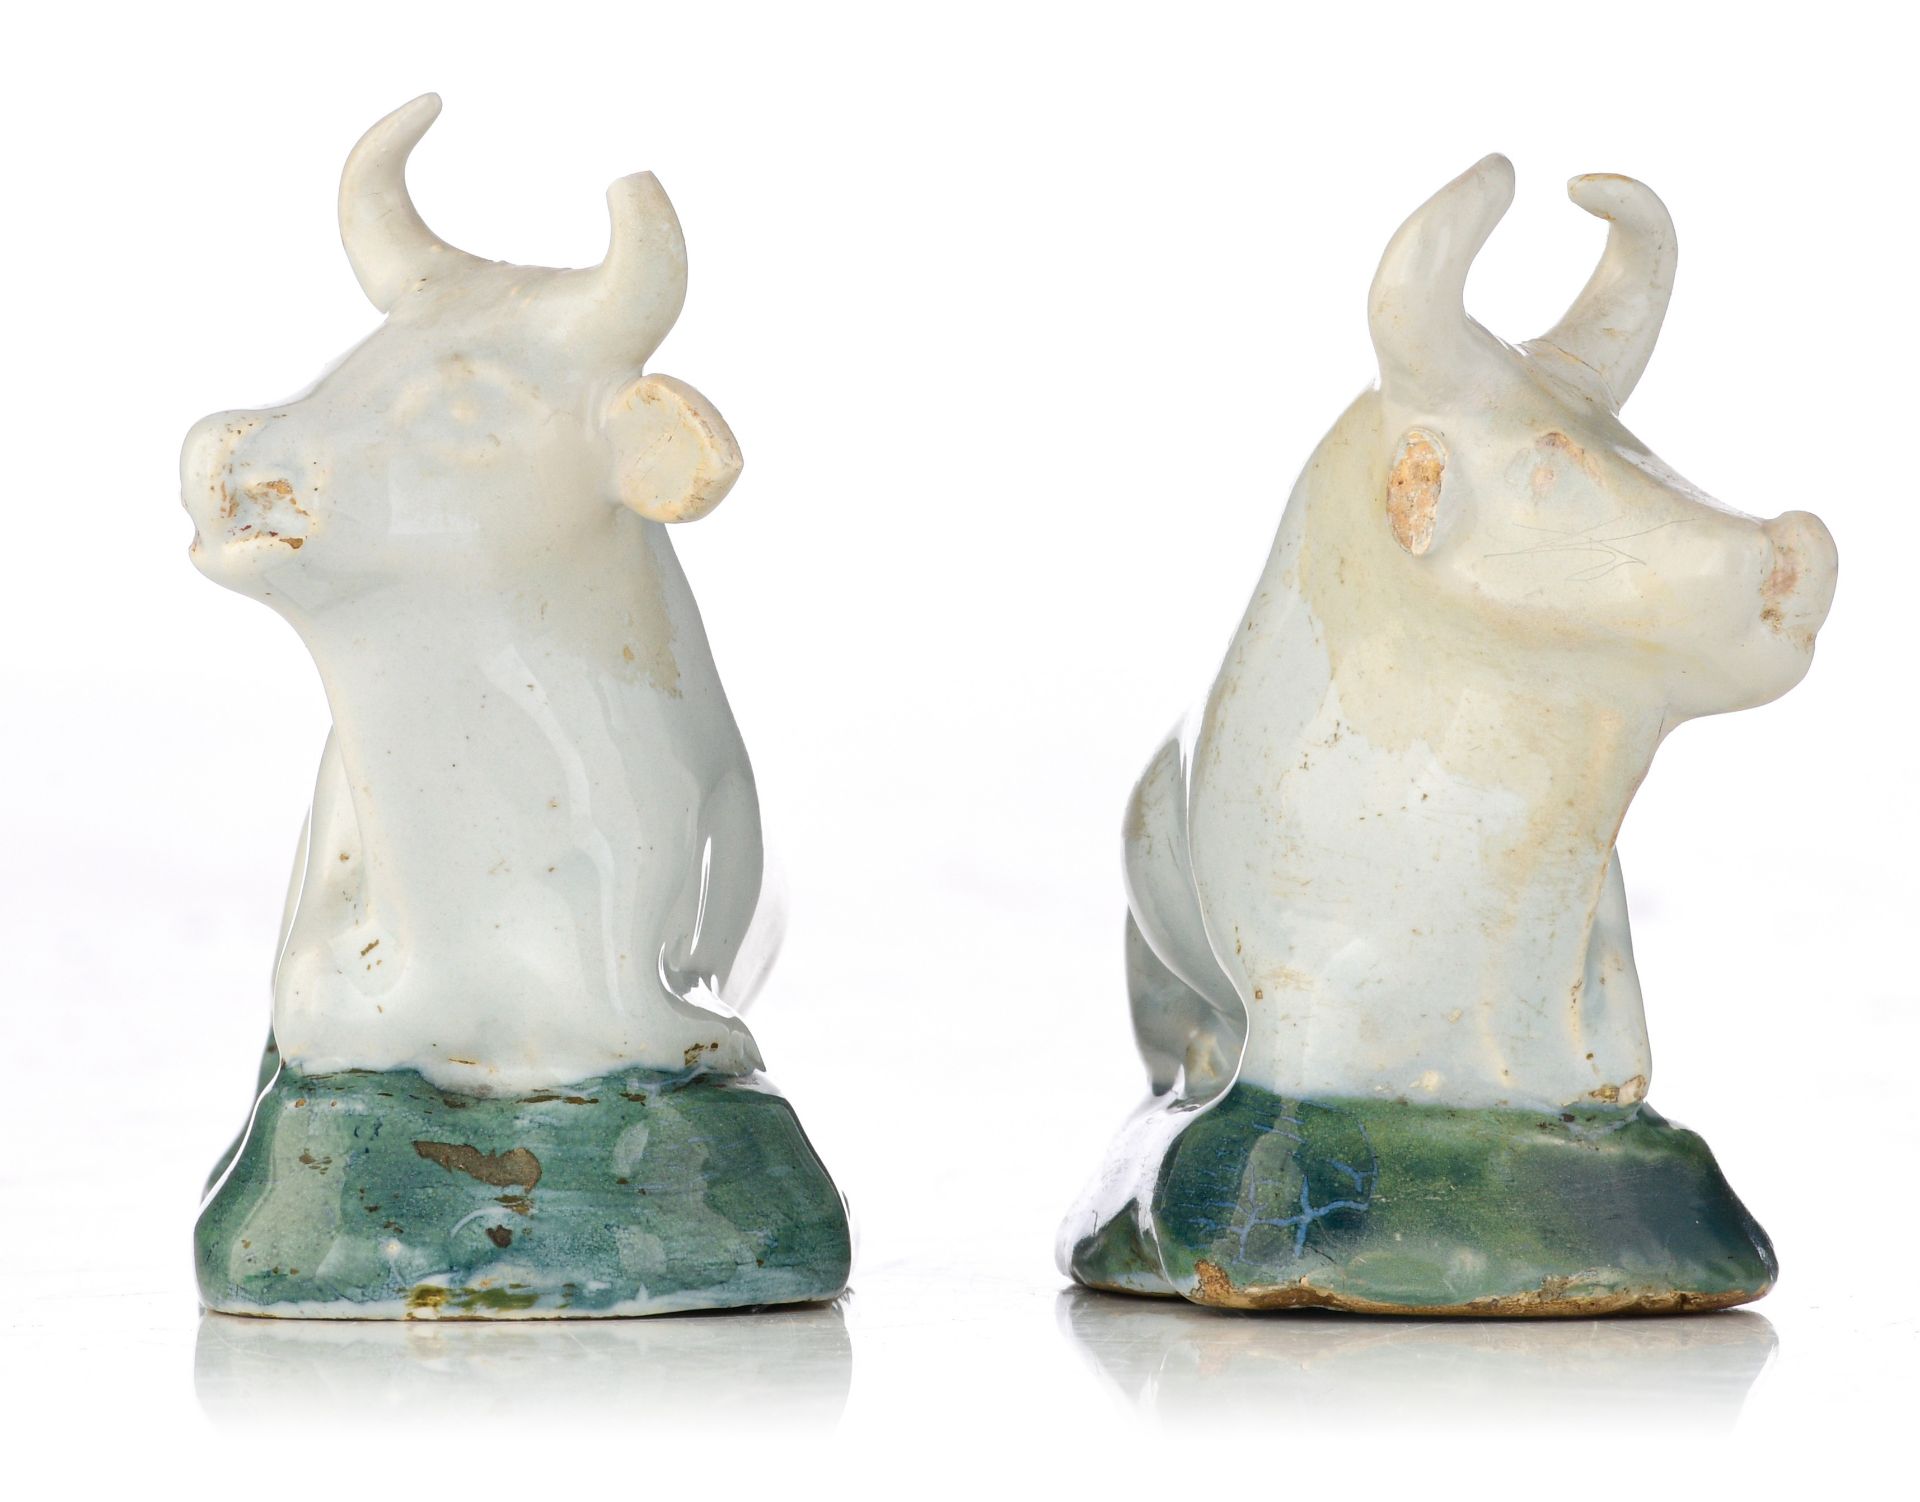 (BIDDING ONLY ON CARLOBONTE.BE) A rare pair of white Delft figures of cows, 18thC, marked Geertruy V - Image 5 of 16